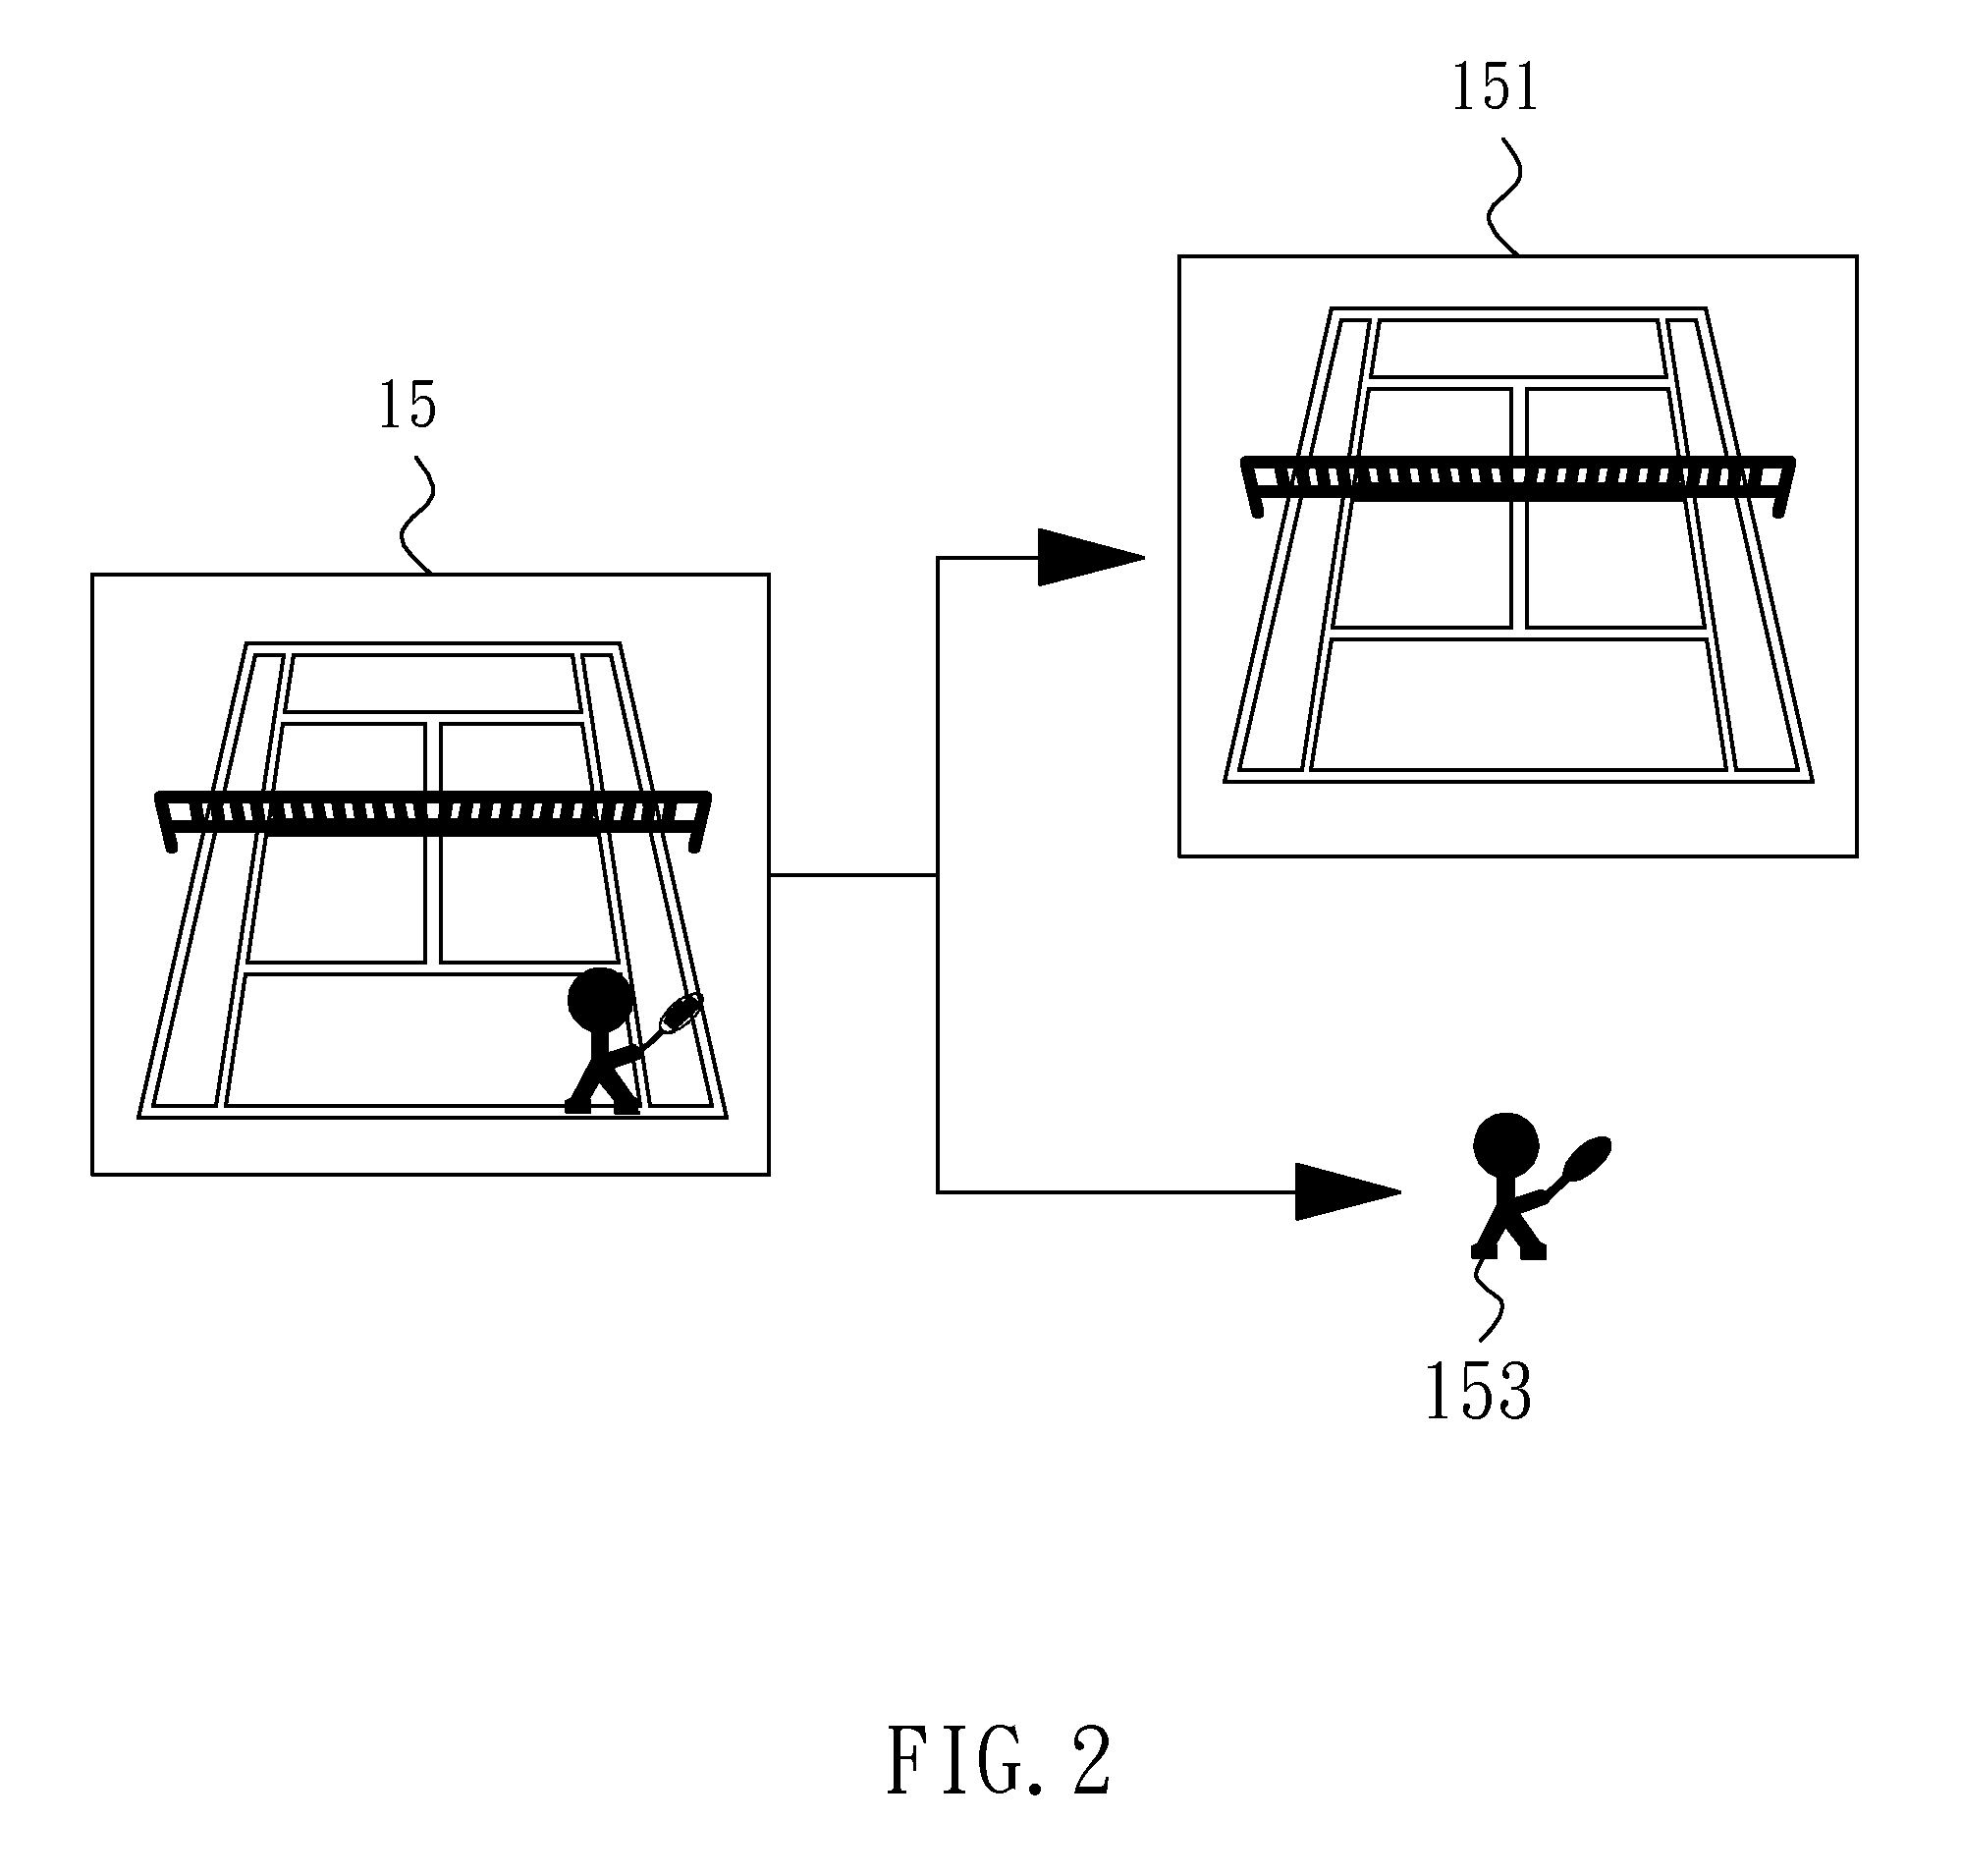 Method for interacting with a video and game simulation system